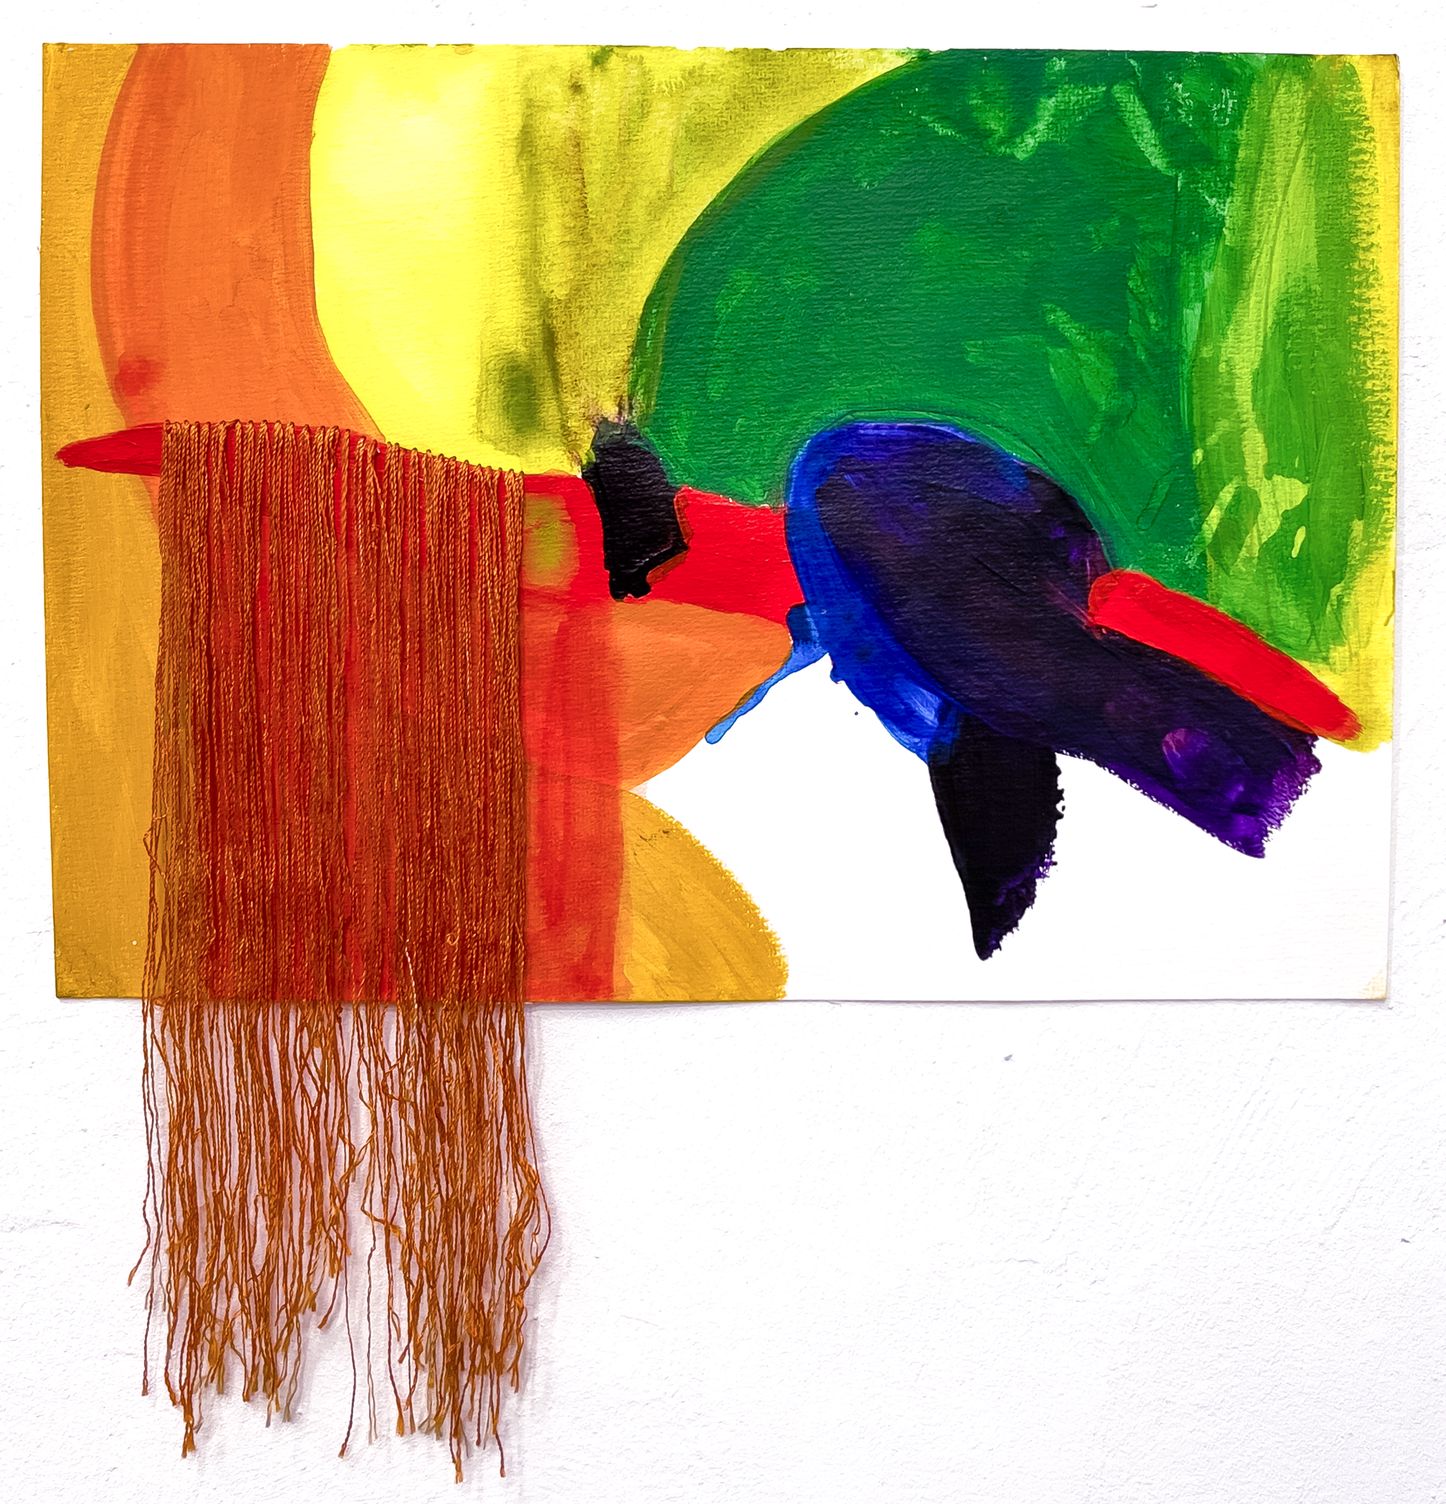 Hanging (2018), Work on Paper by Claudia Hill